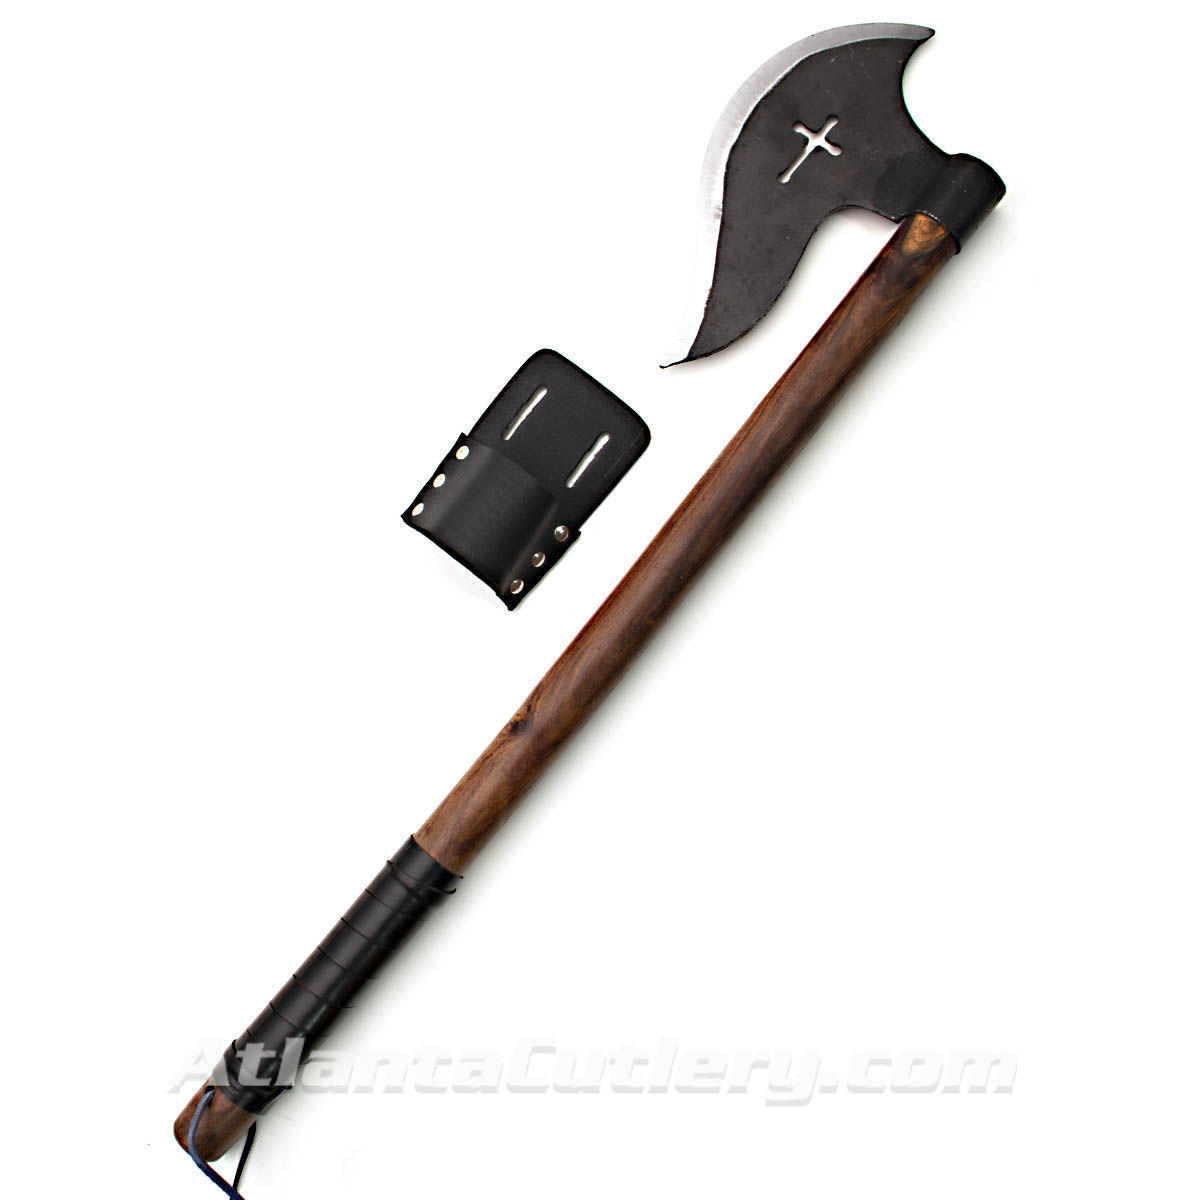 "Display" Crusader Axe with leather frog